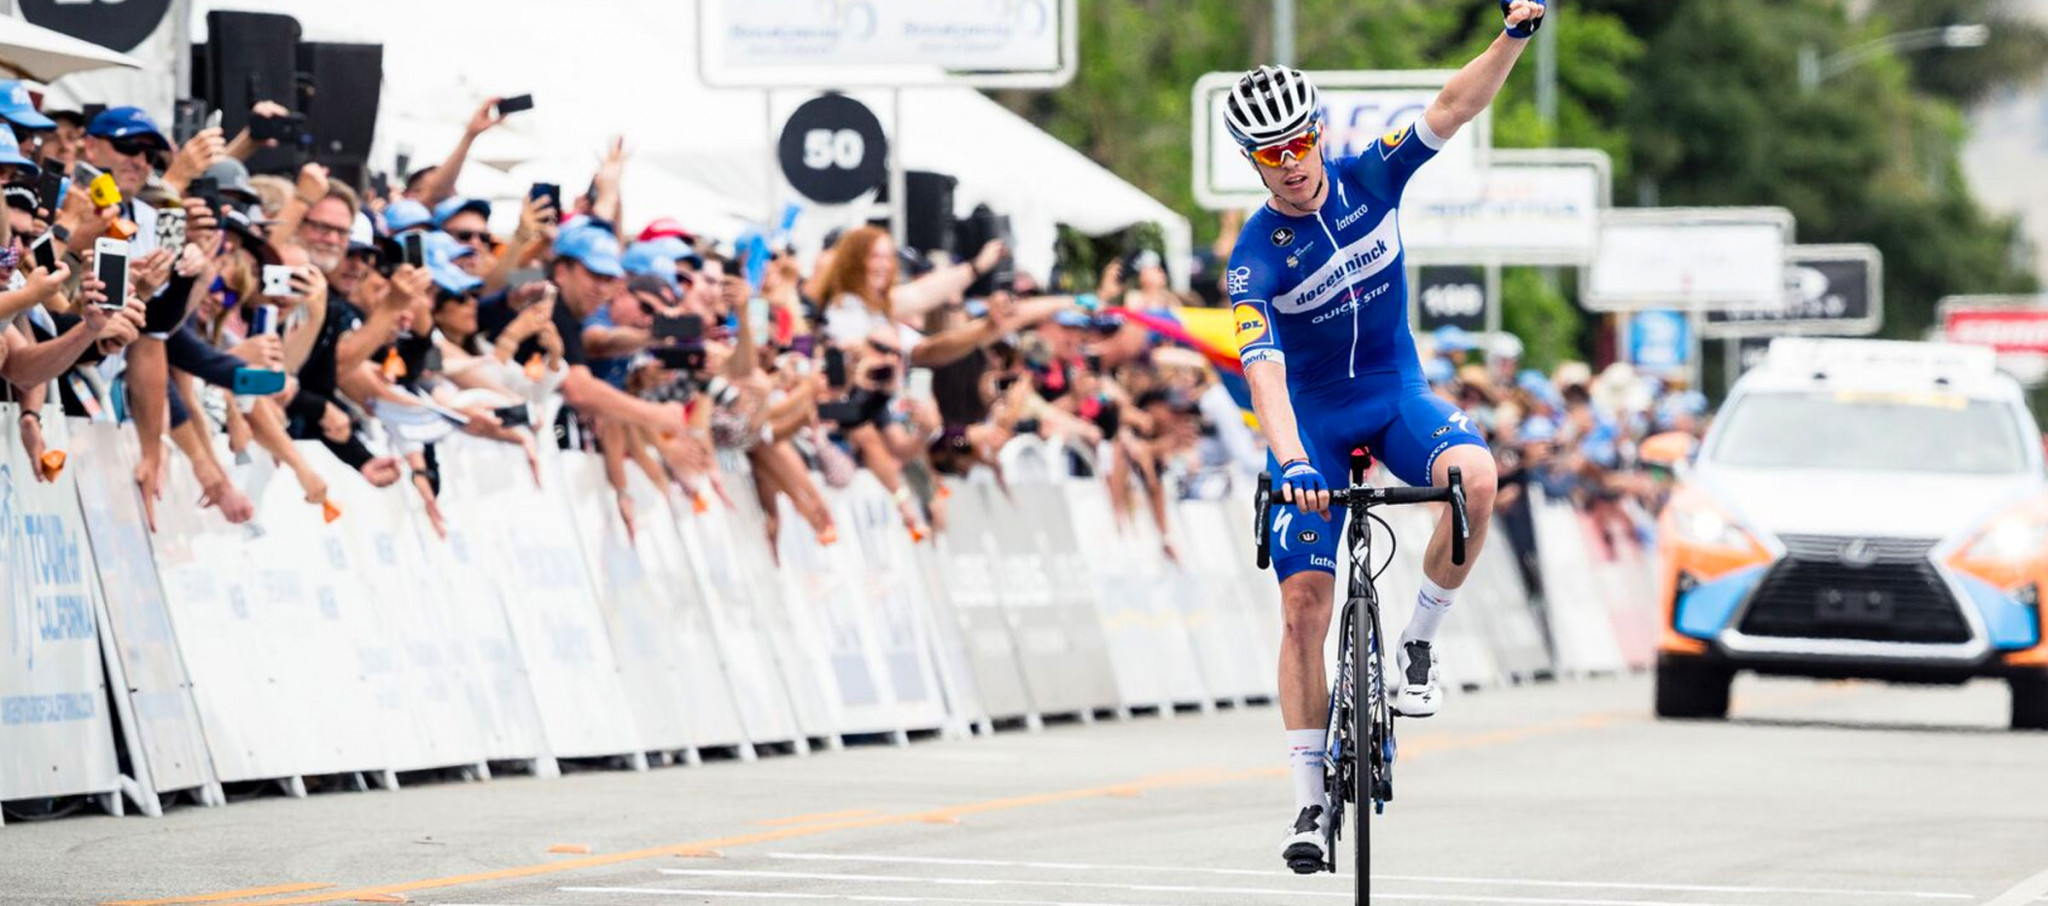 Cavagna wins stage three of Tour of California after surviving lone breakaway